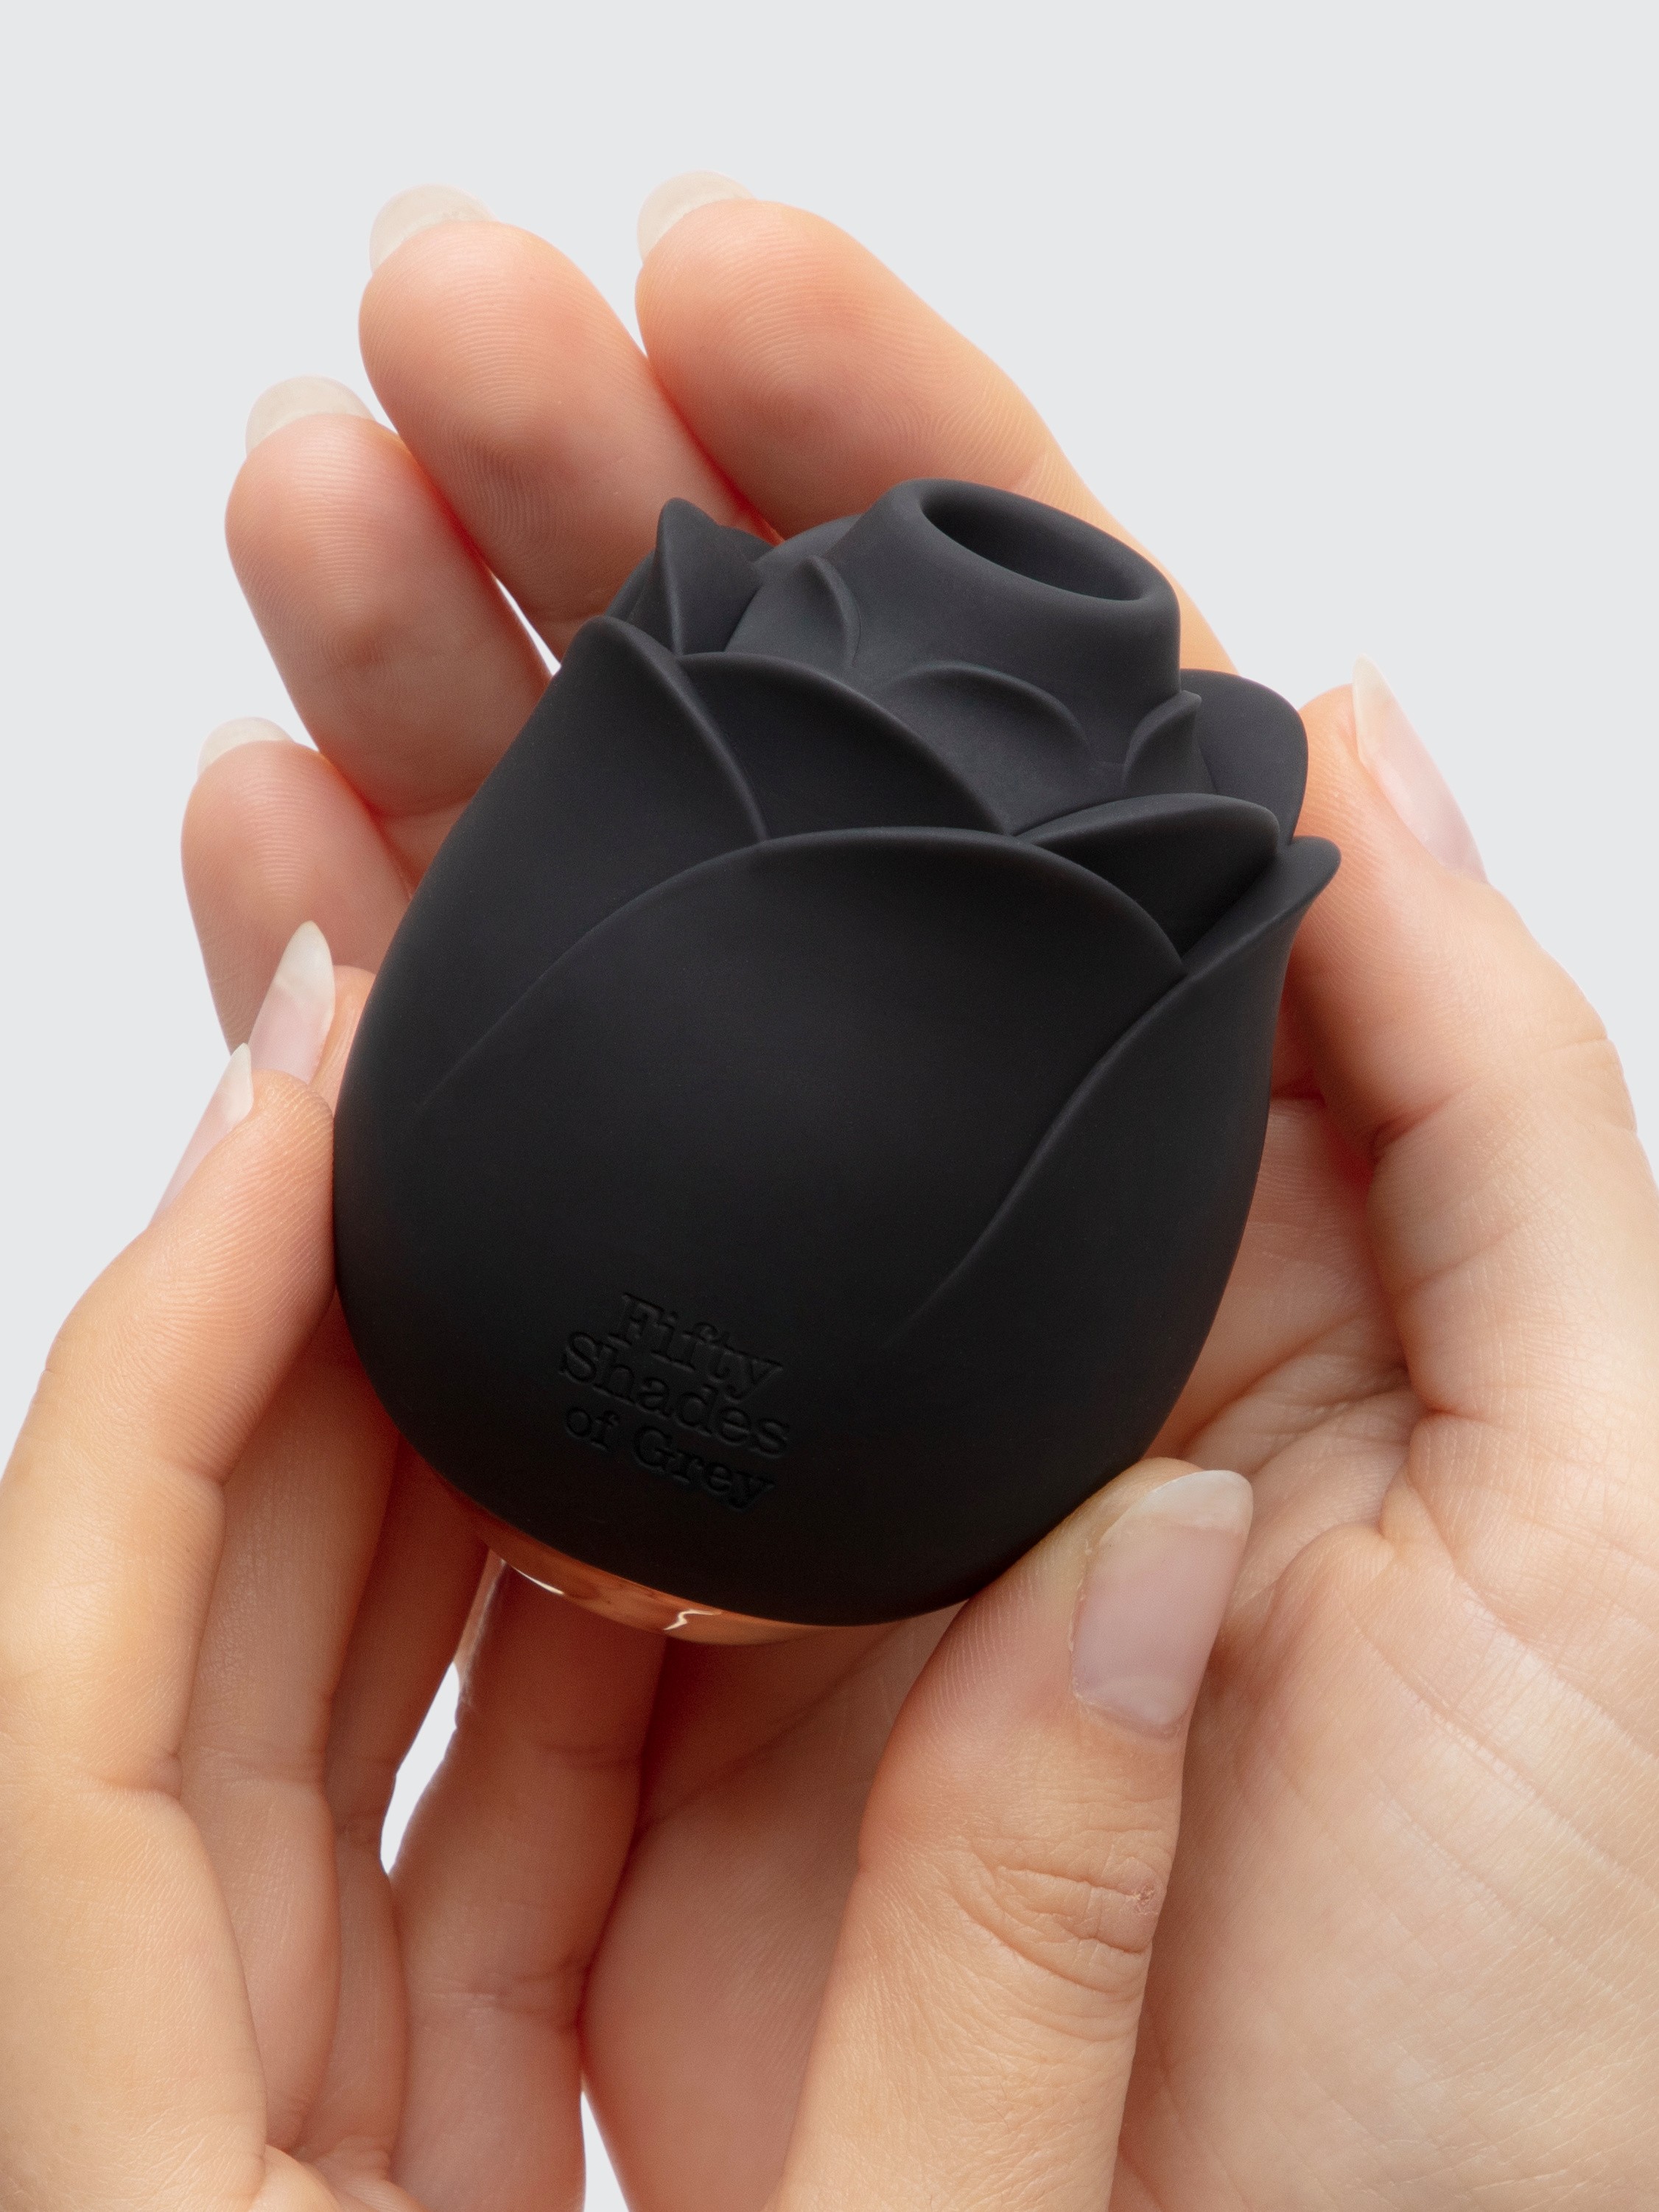 Fifty Shades of Grey Stimulateur d'aspiration clitoridien en silicone Black Rose